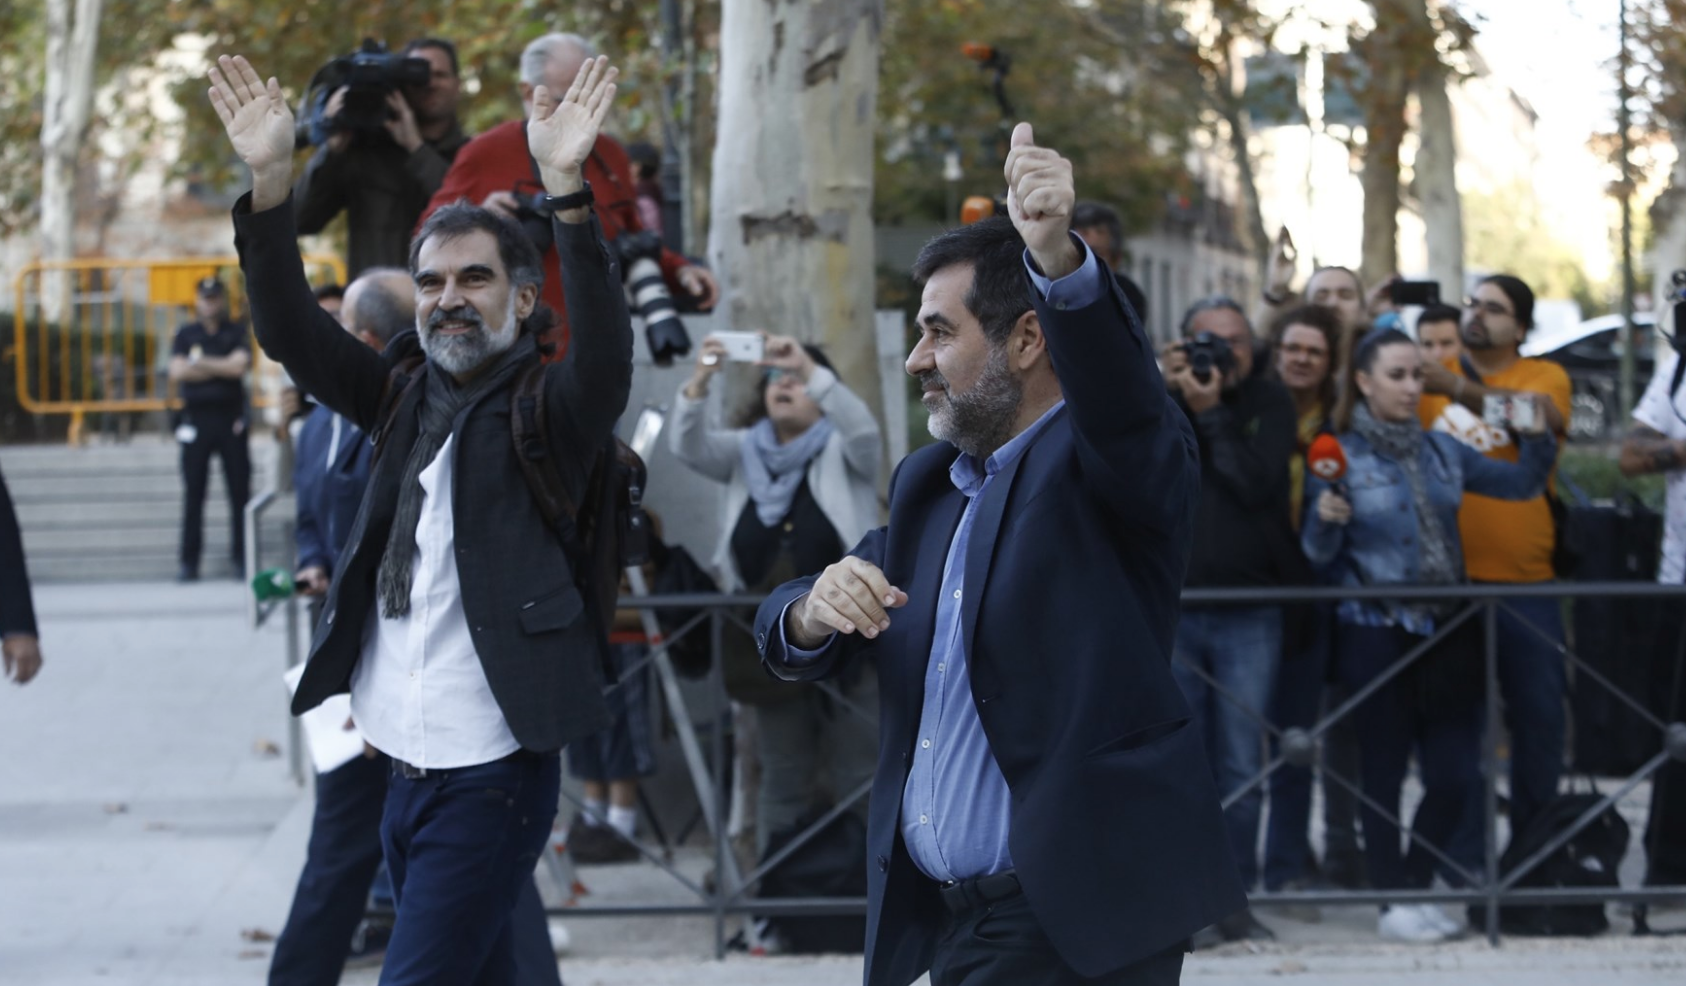 Jordi Cuixart and Jordi Sánchez on their way to the Court